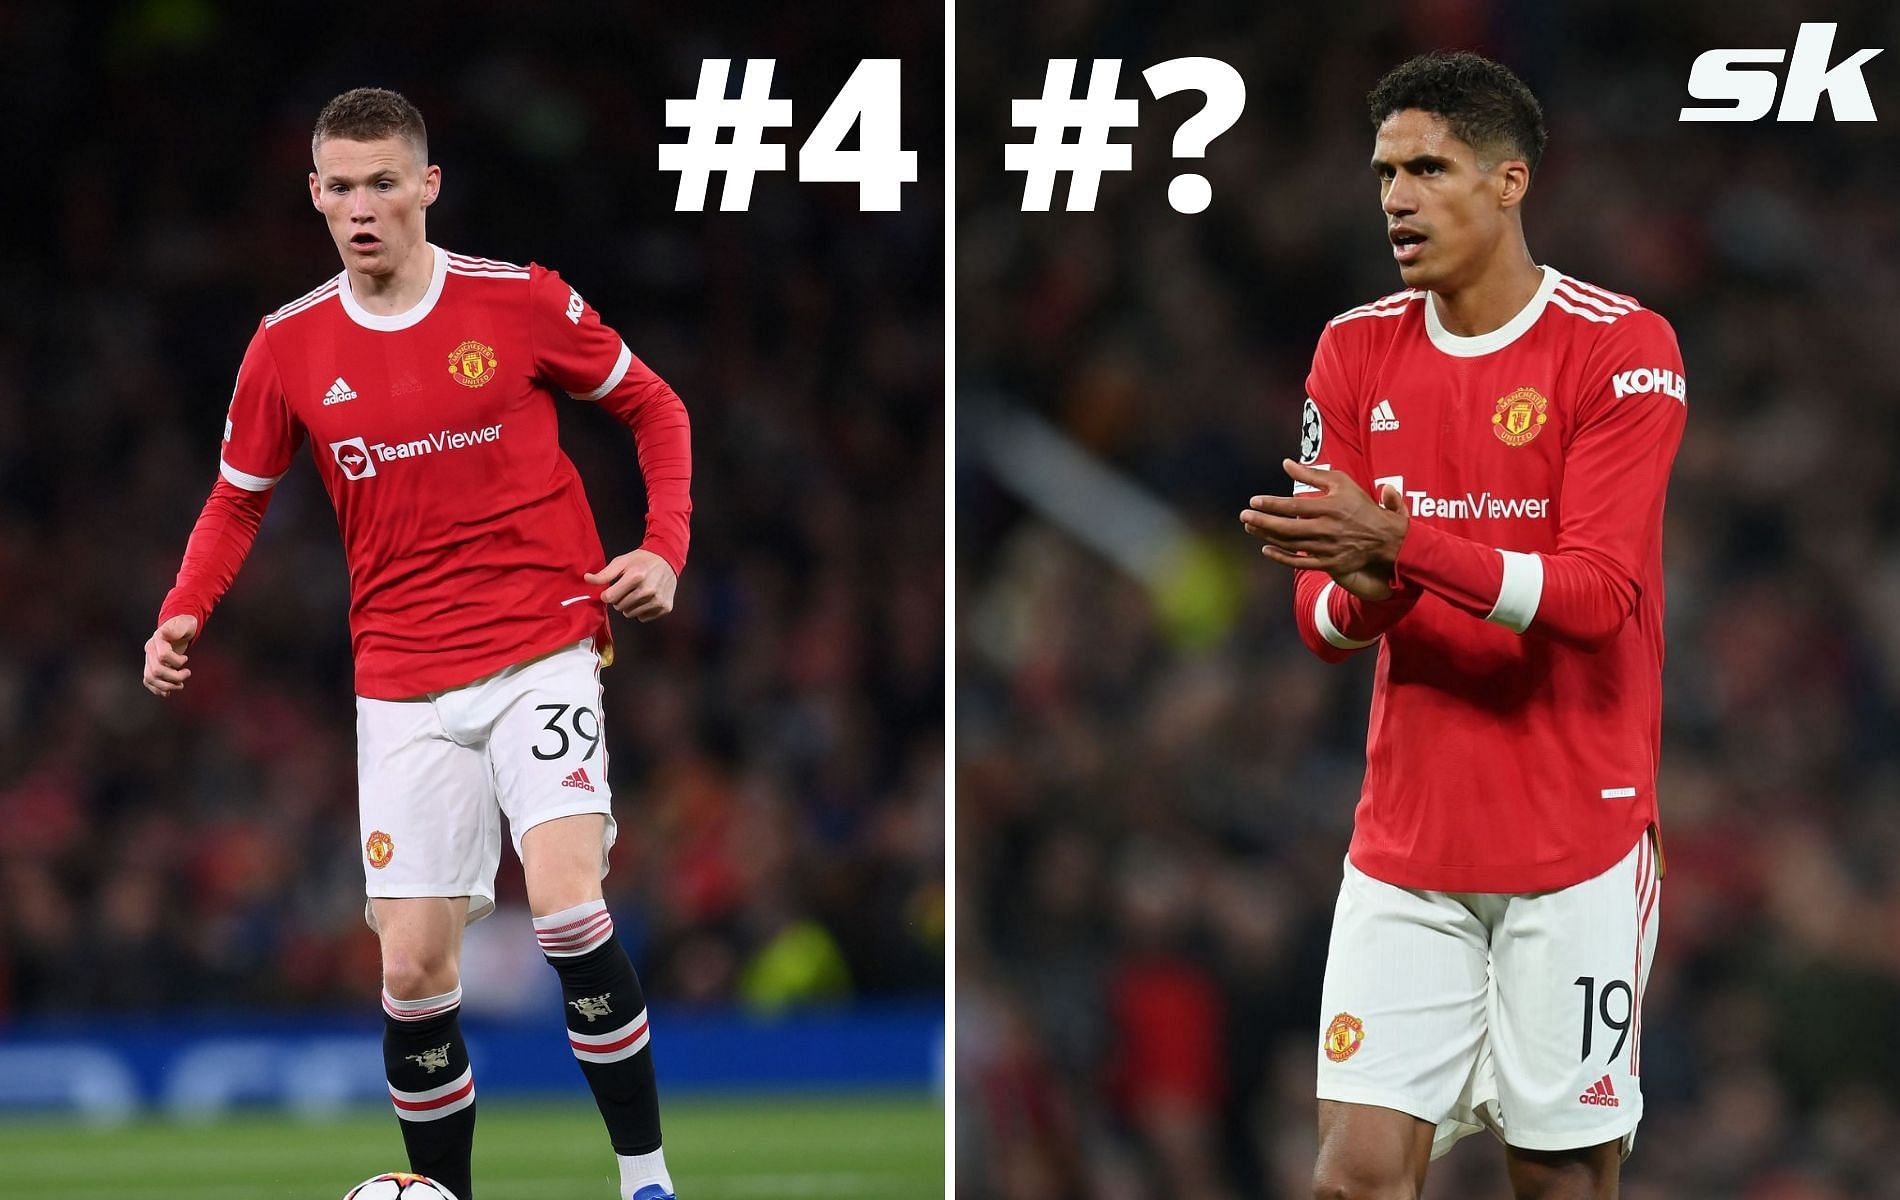 Who is the best passer at Manchester United right now?